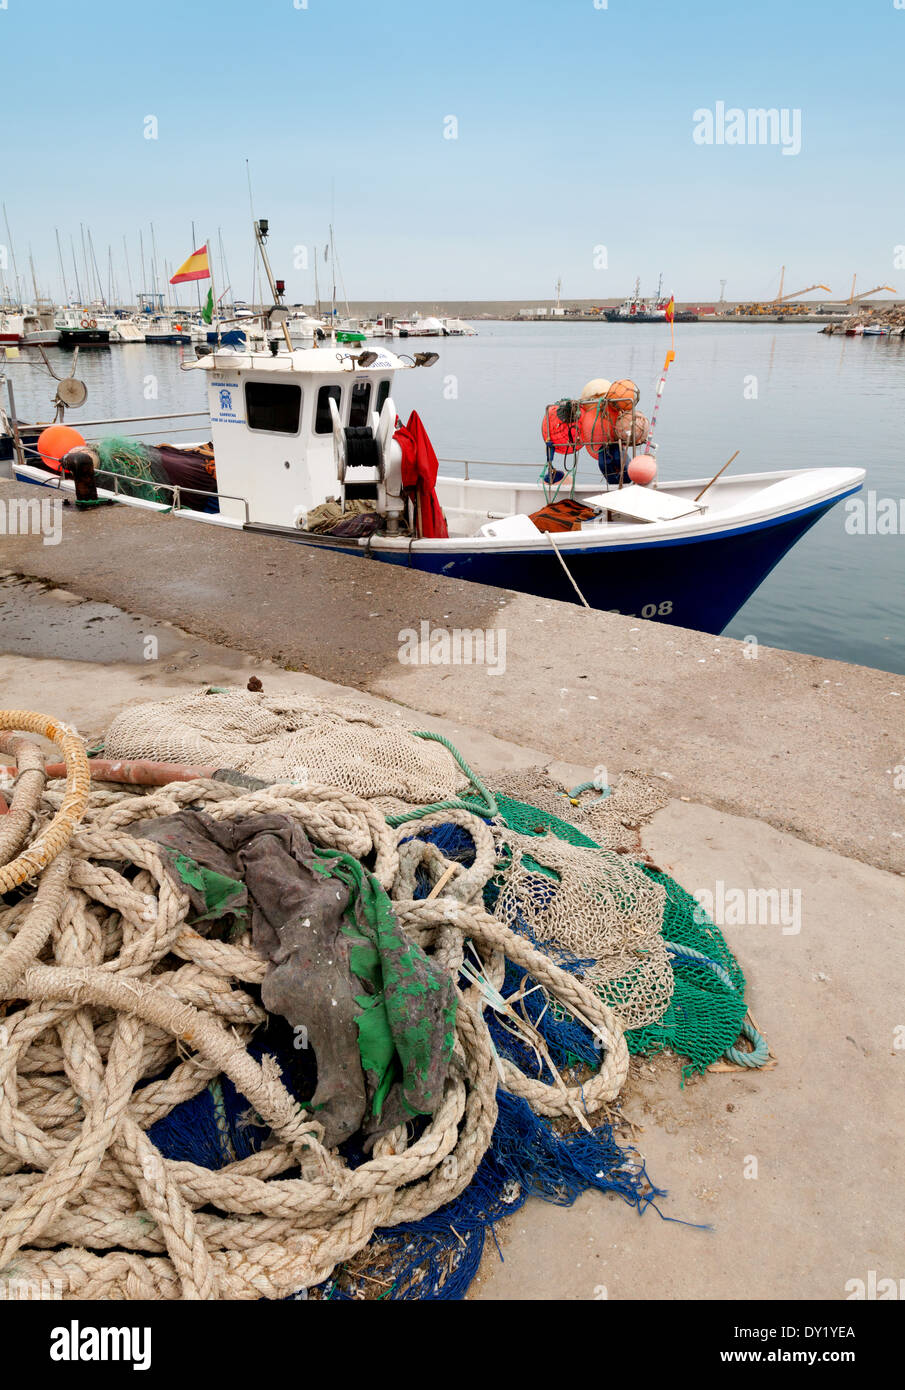 A fishing boat and nets in the port, the town of Garrucha on the mediterranean sea coast, Almeria Andalusia Spain Europe Stock Photo